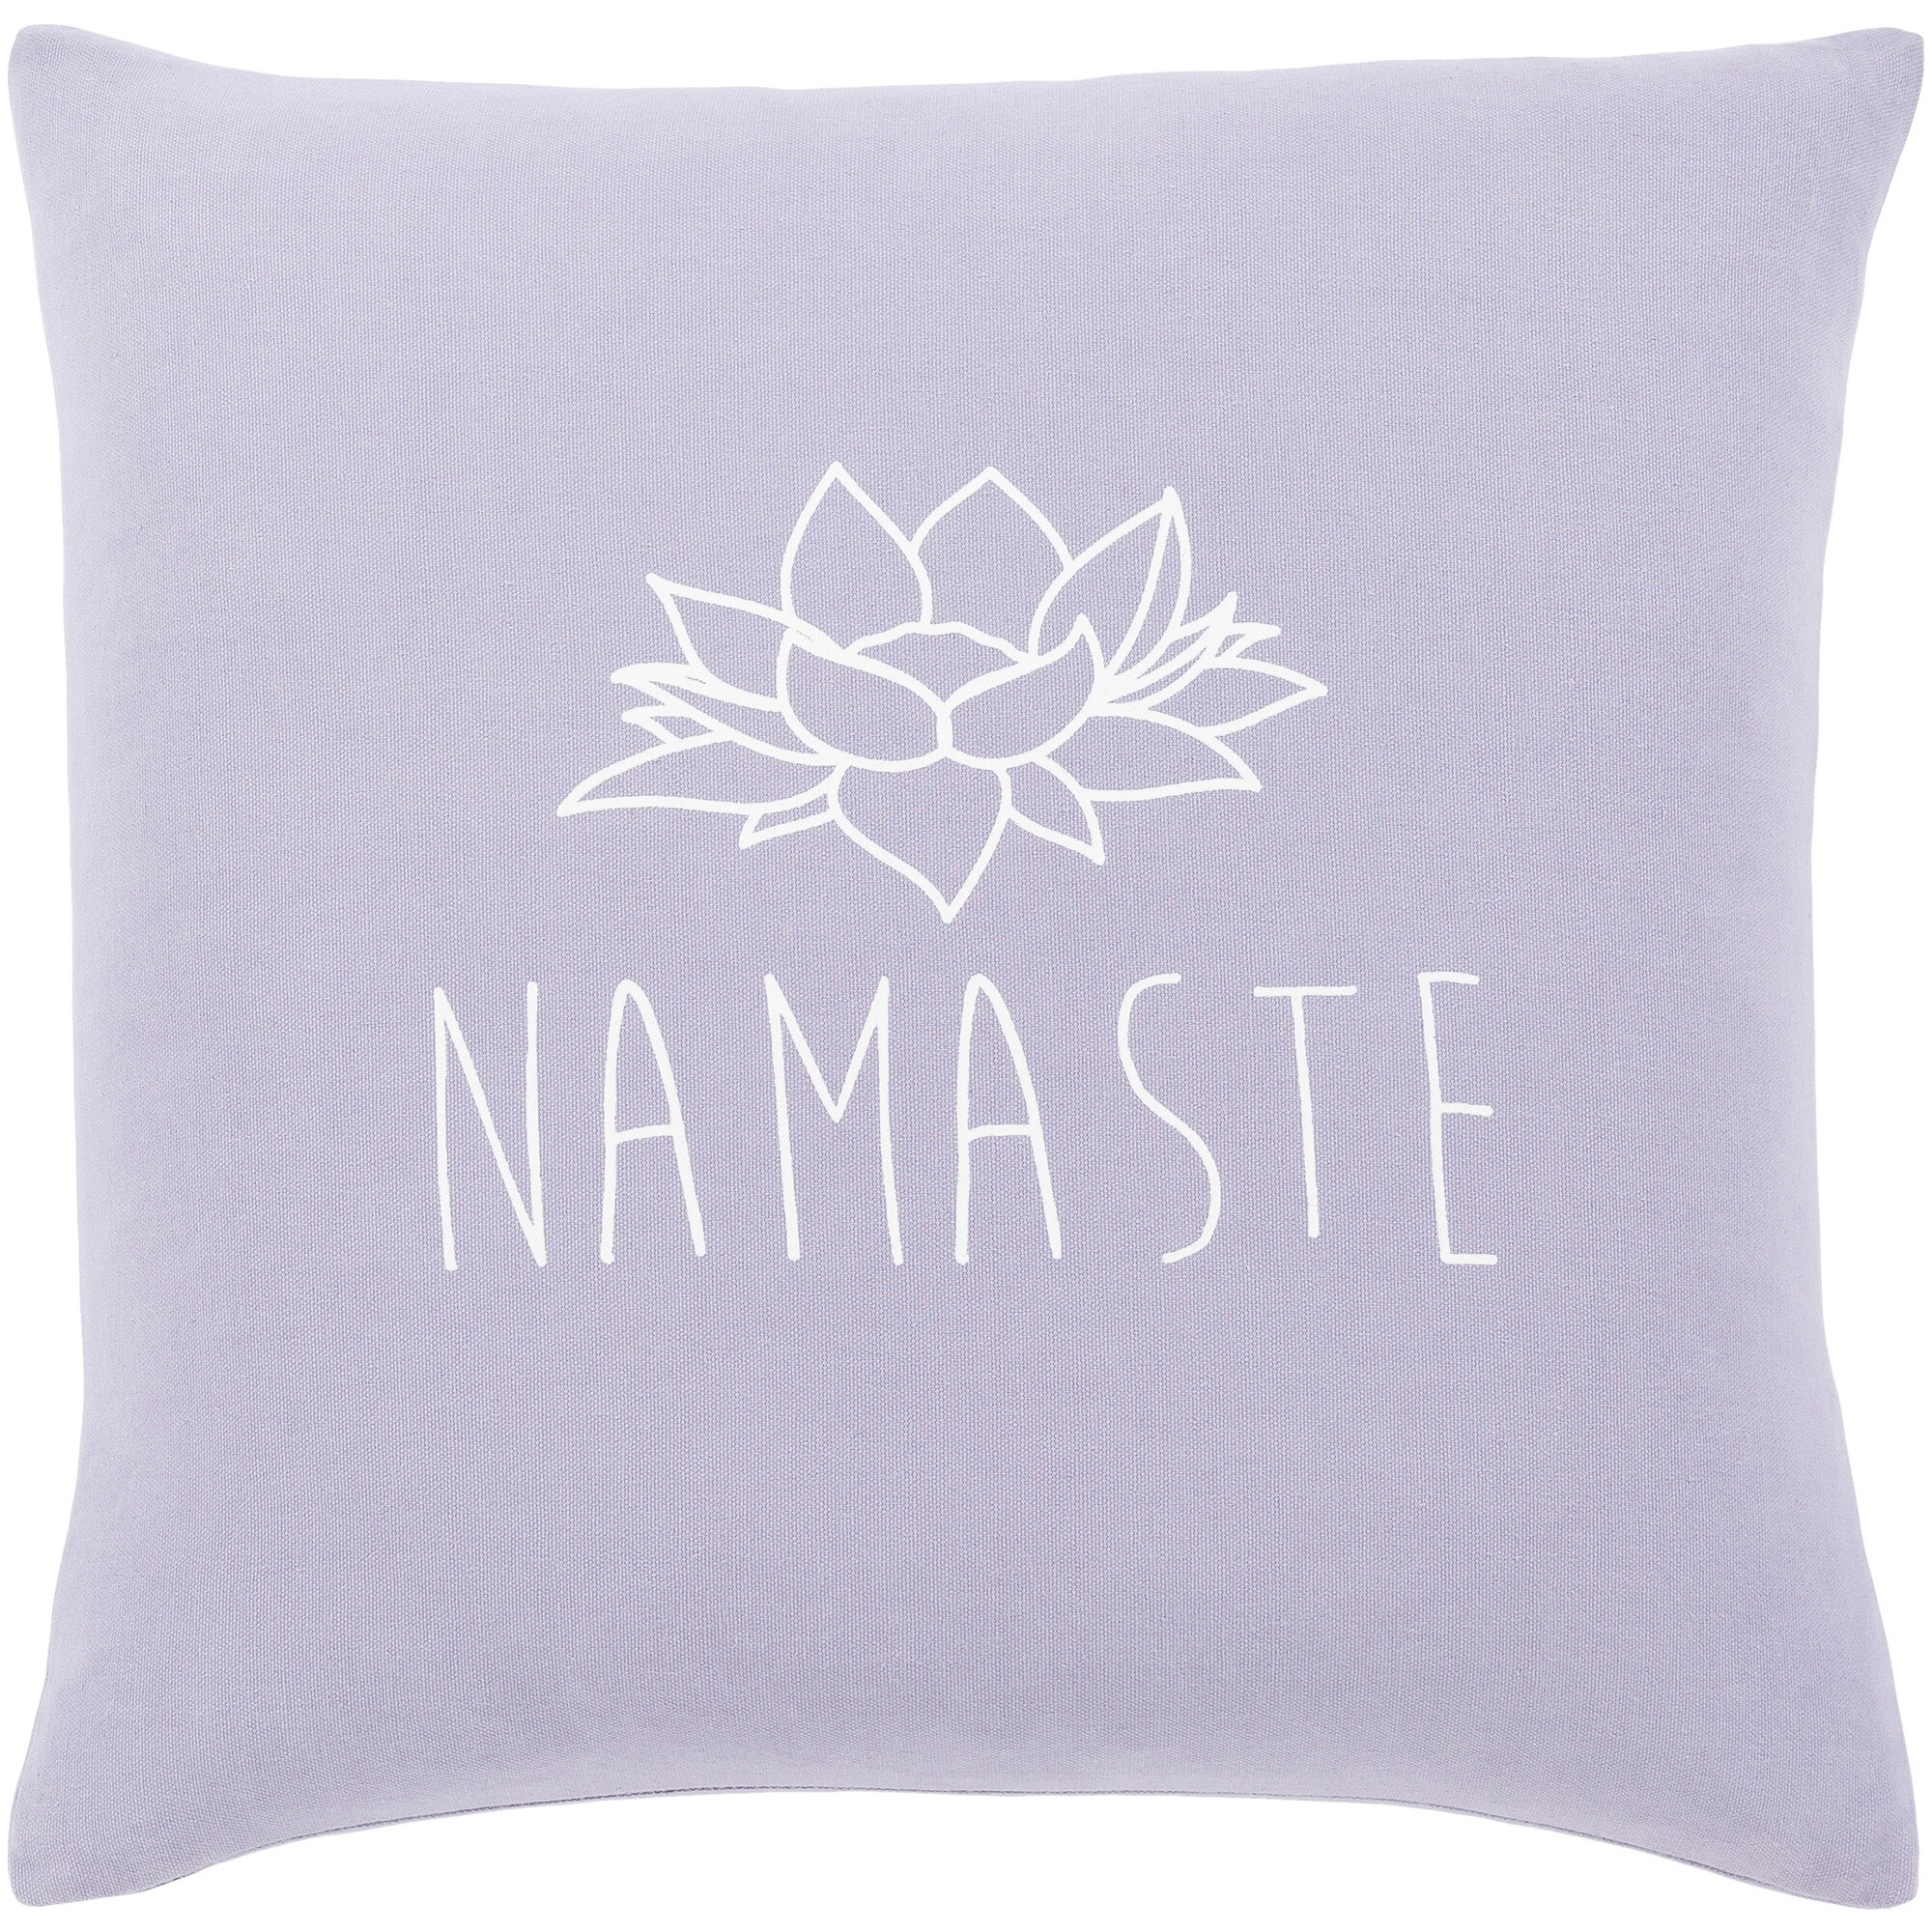 Artistic Weavers Blessed Lavender "Namaste" Throw Pillow Cover (22" x 22")